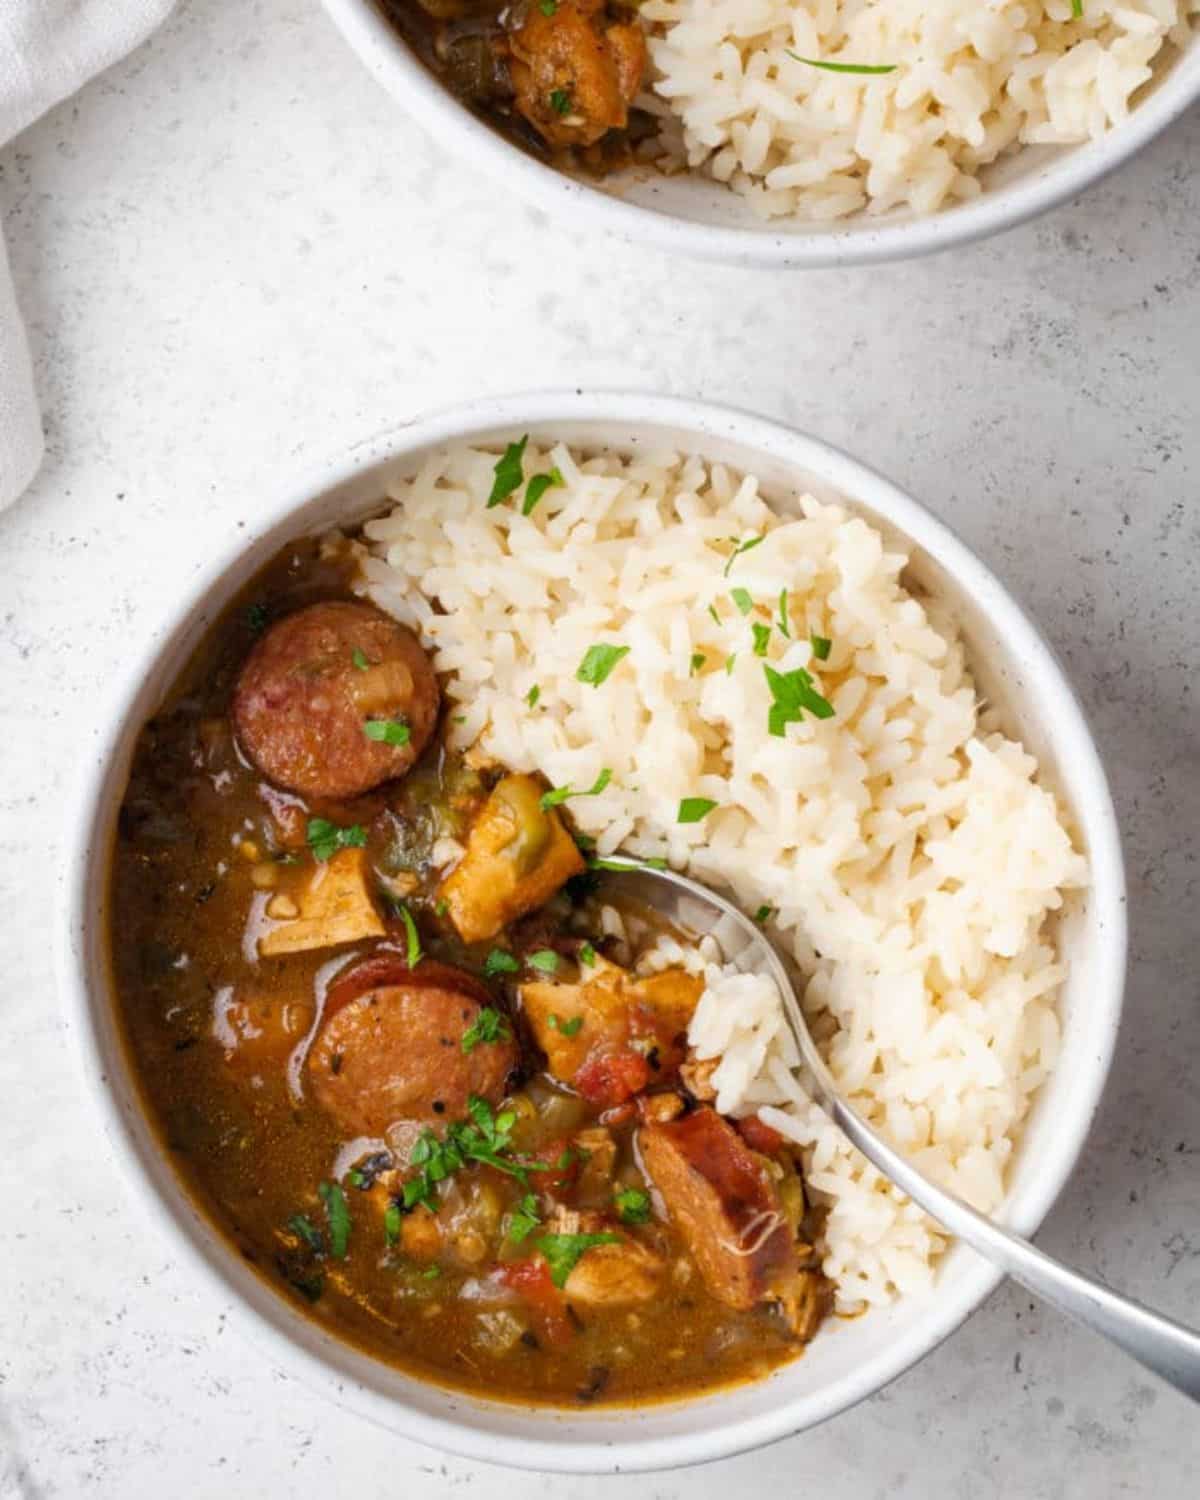 Delicious chicken and sausage gumbo in a white bowl with a spoon.